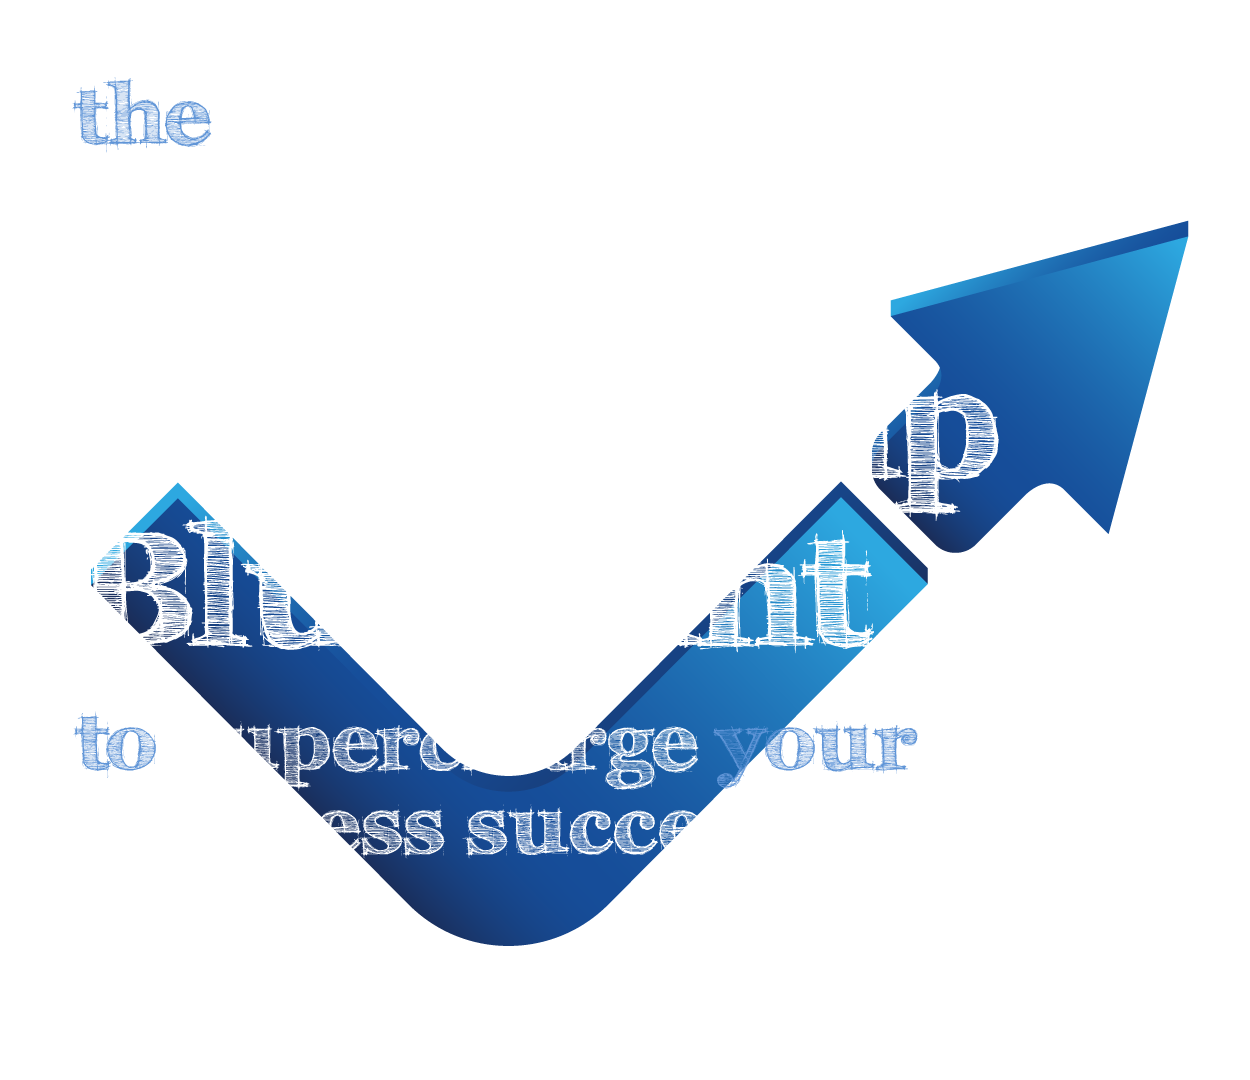 The Ultimate Leadership Blueprint to supercharge your business success